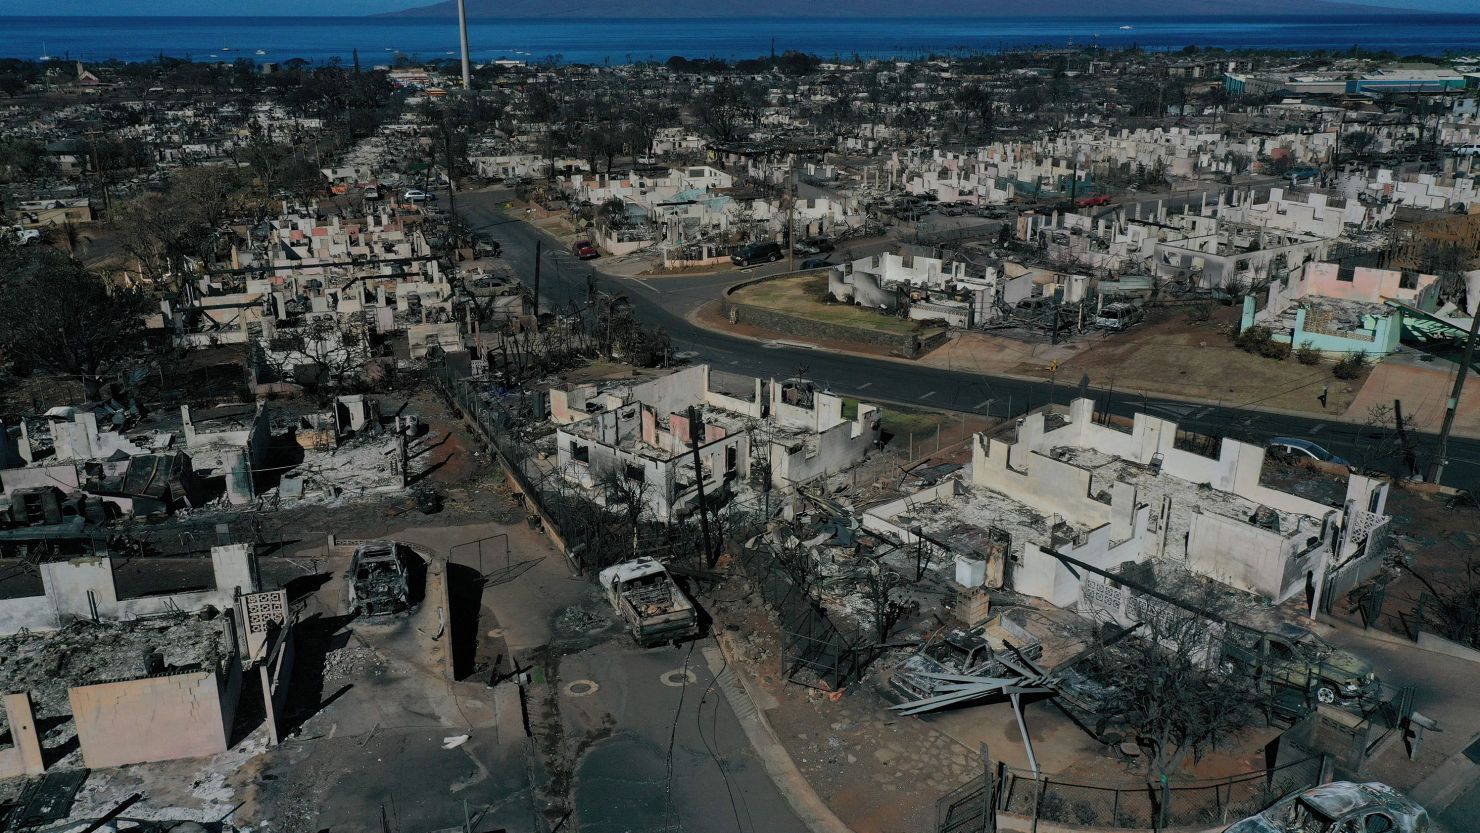 An aerial image shows destroyed homes and vehicles on August 17 after a wind-driven wildfire burned through Lahaina, Hawaii.